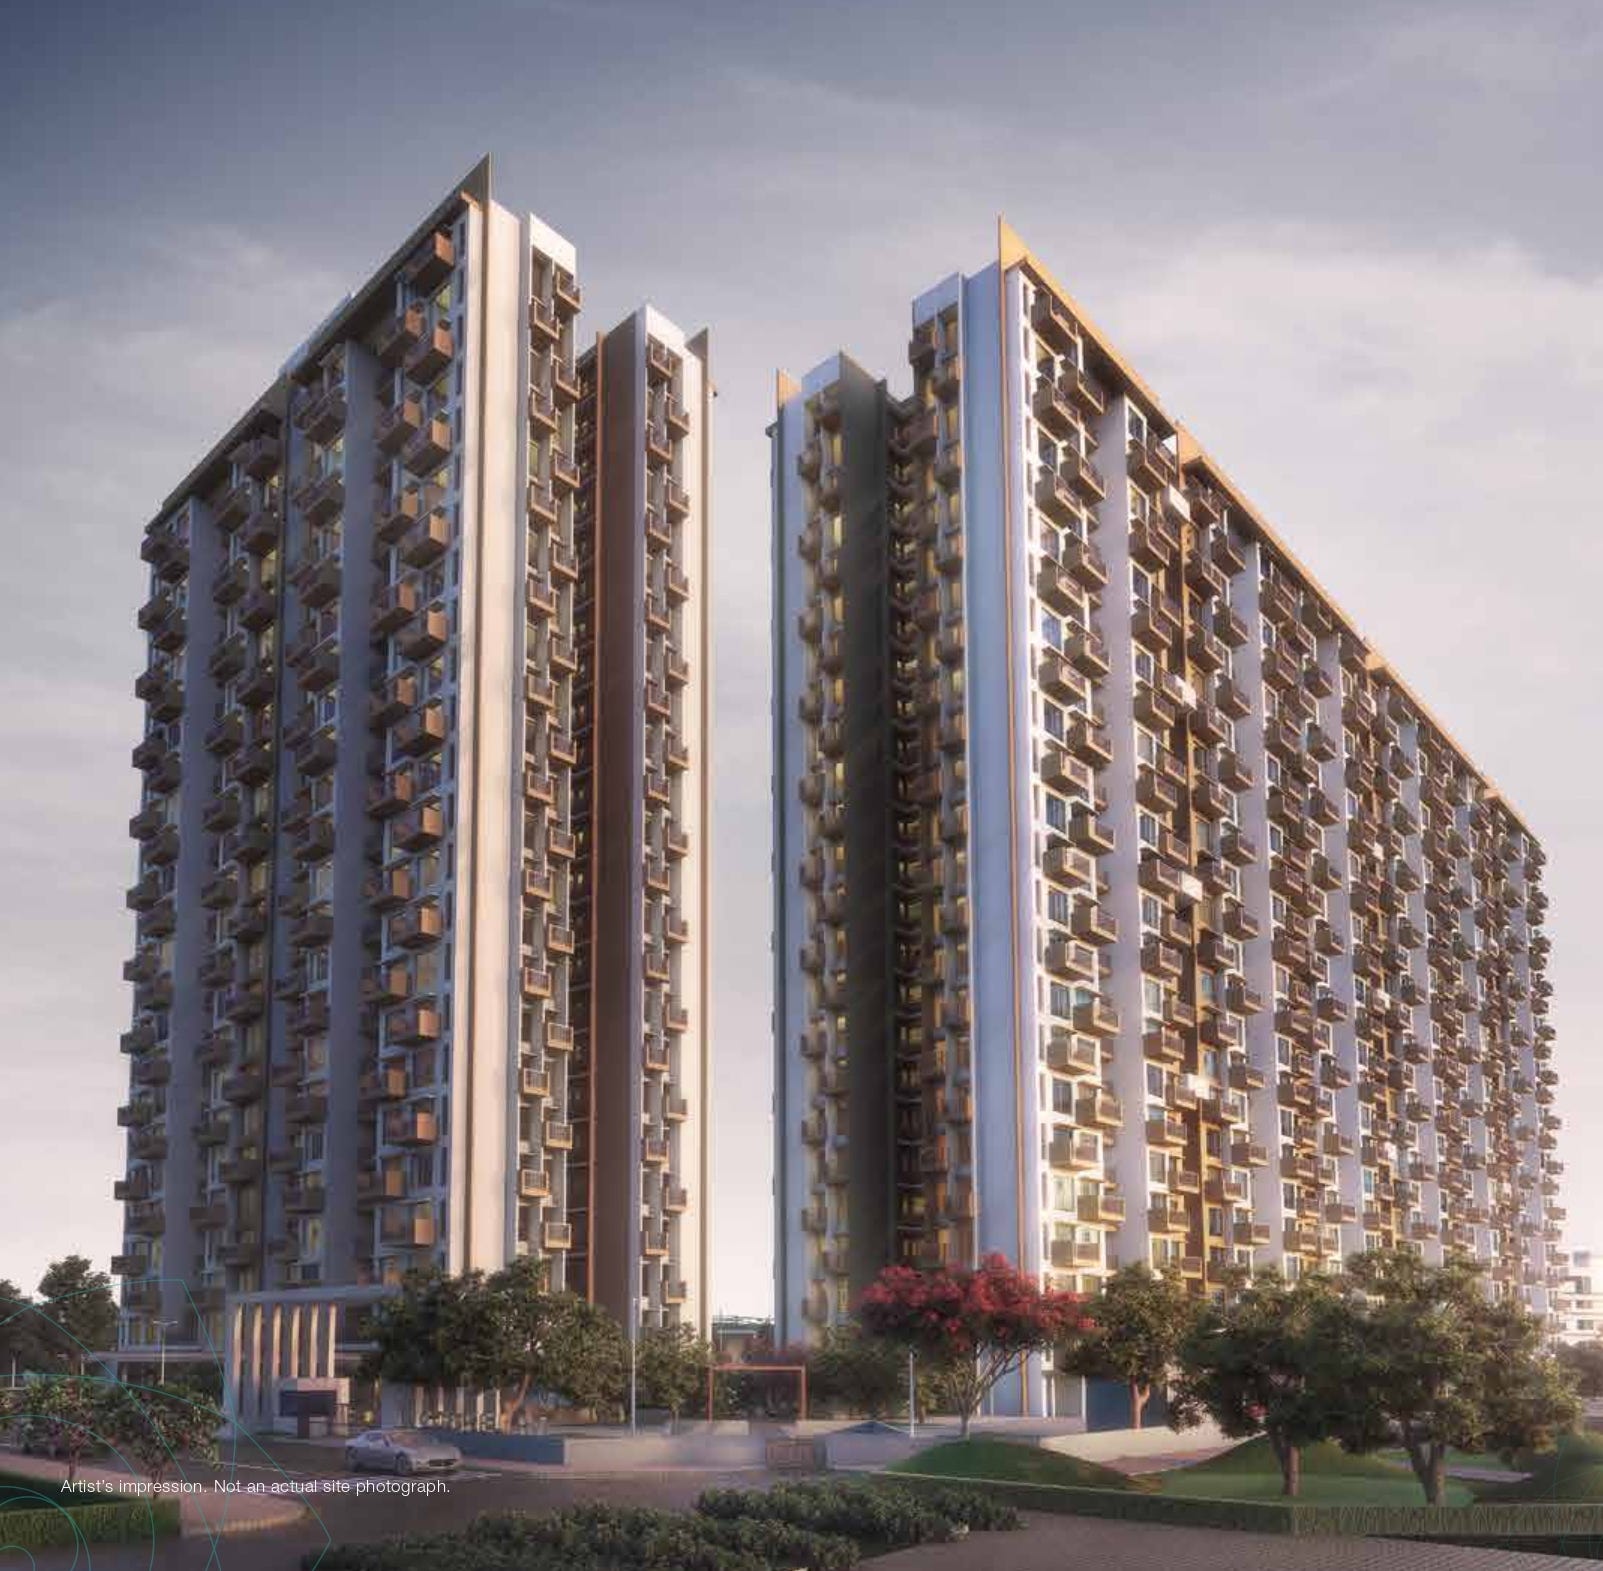 Godrej Boulevard, 1 BHK flats for sale in Pune, 1 BHK Apartments,Properties for sale in Pune,Commercial spaces for Sale